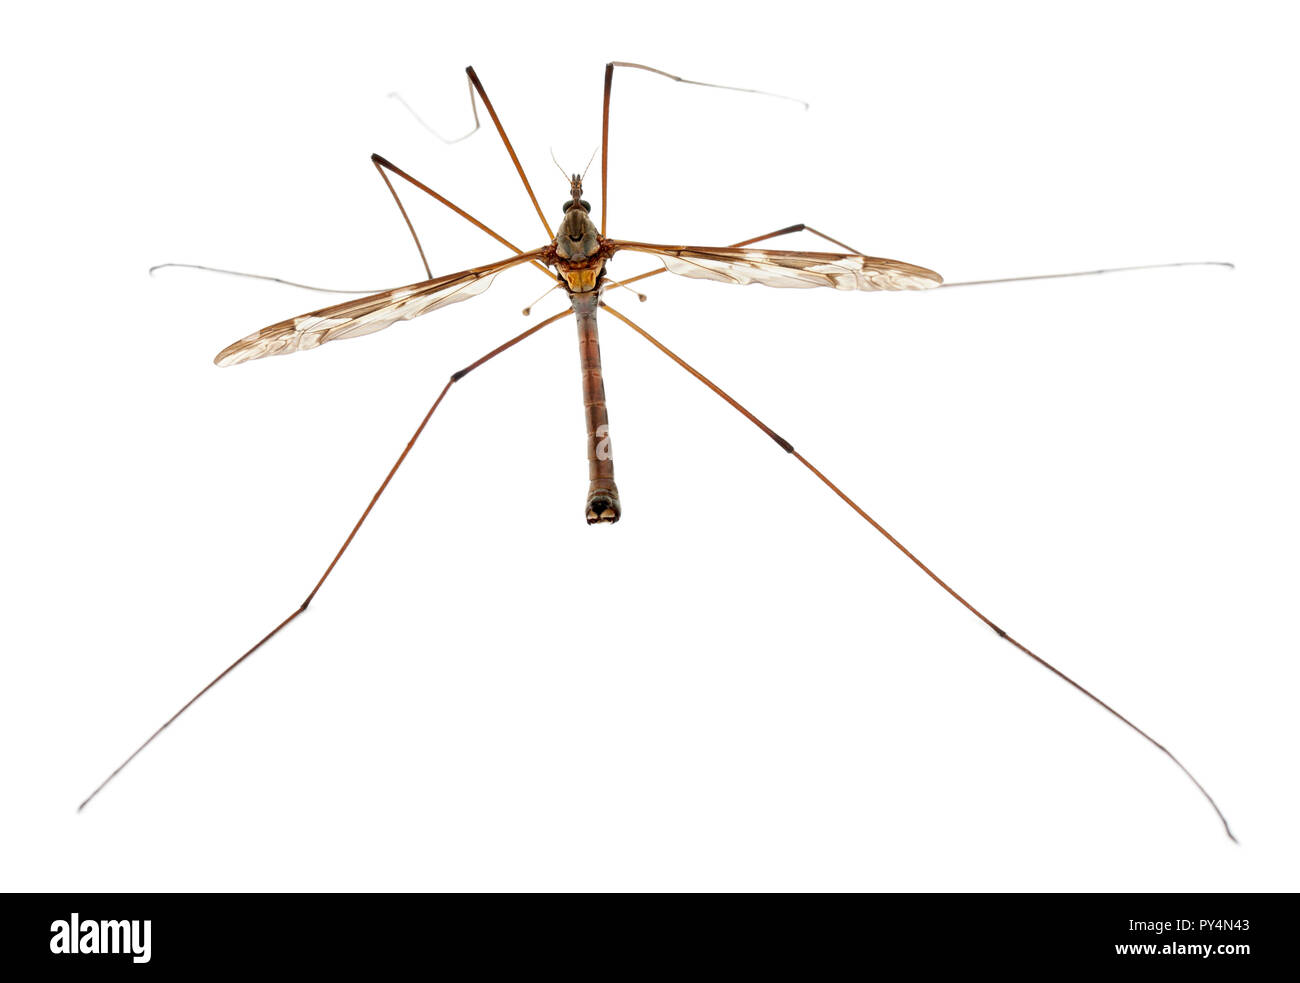 Crane fly or daddy long-legs, Tipula maxima, in front of white background Stock Photo